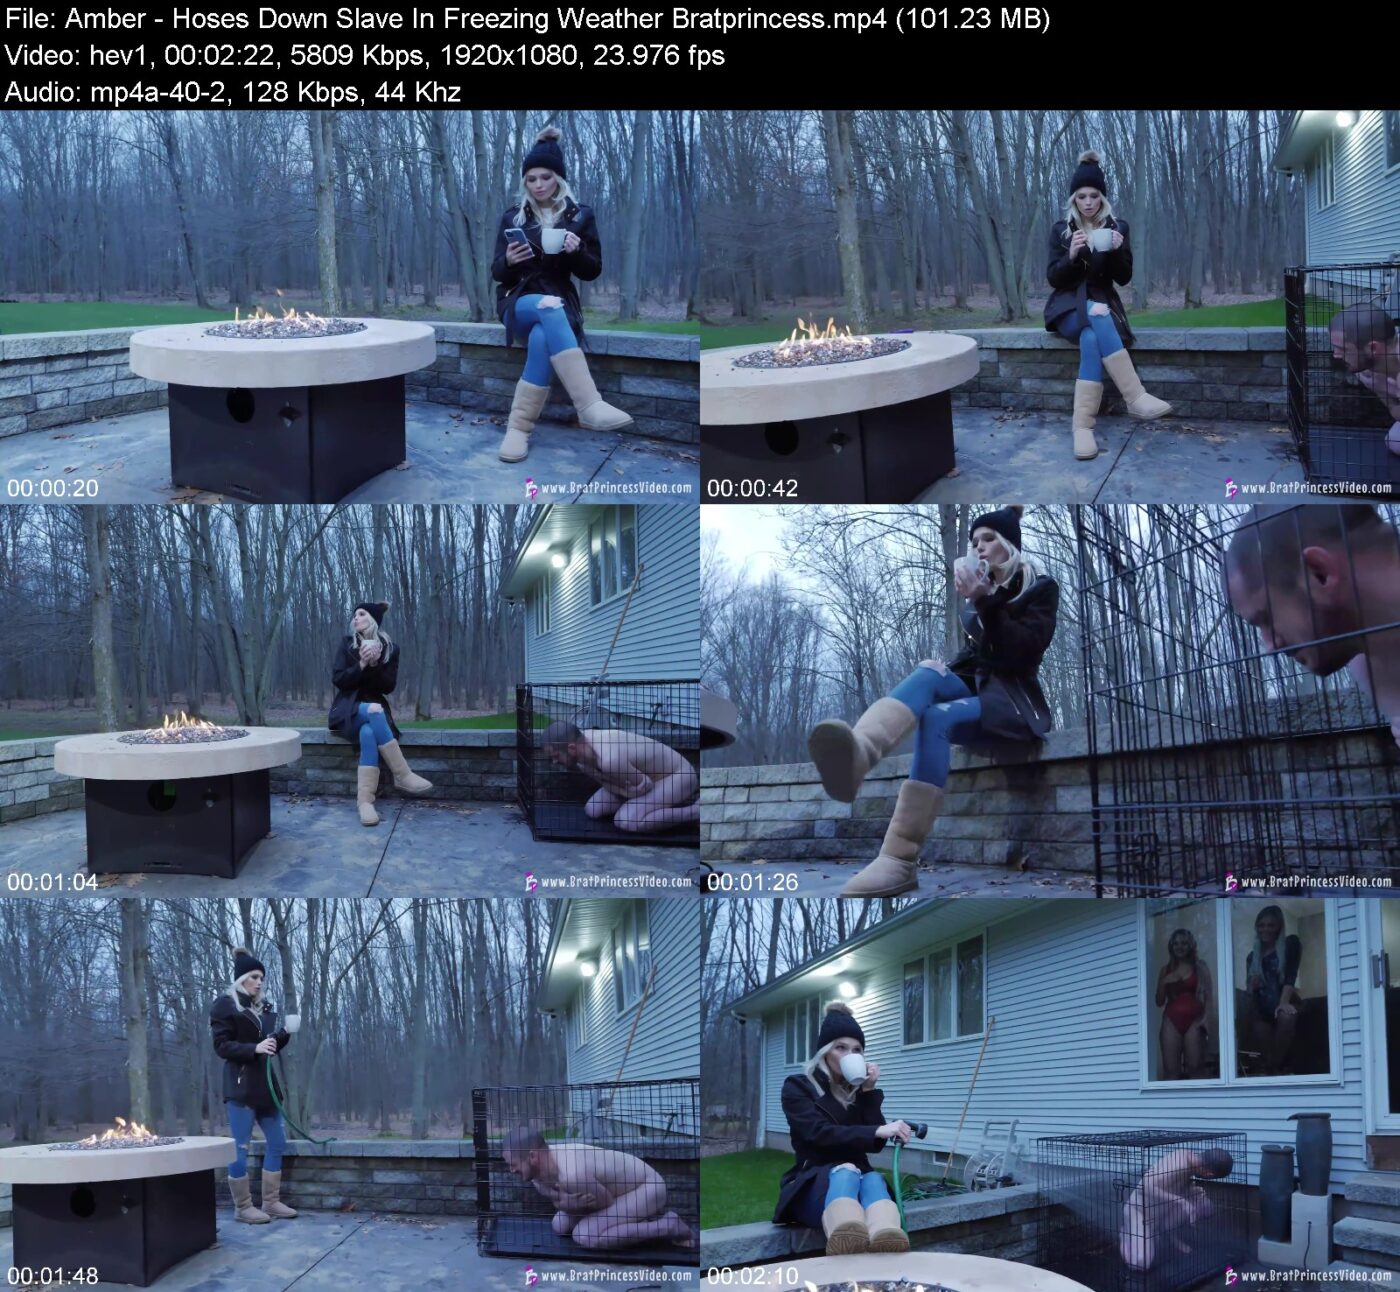 Amber in Hoses Down Slave In Freezing Weather Bratprincess